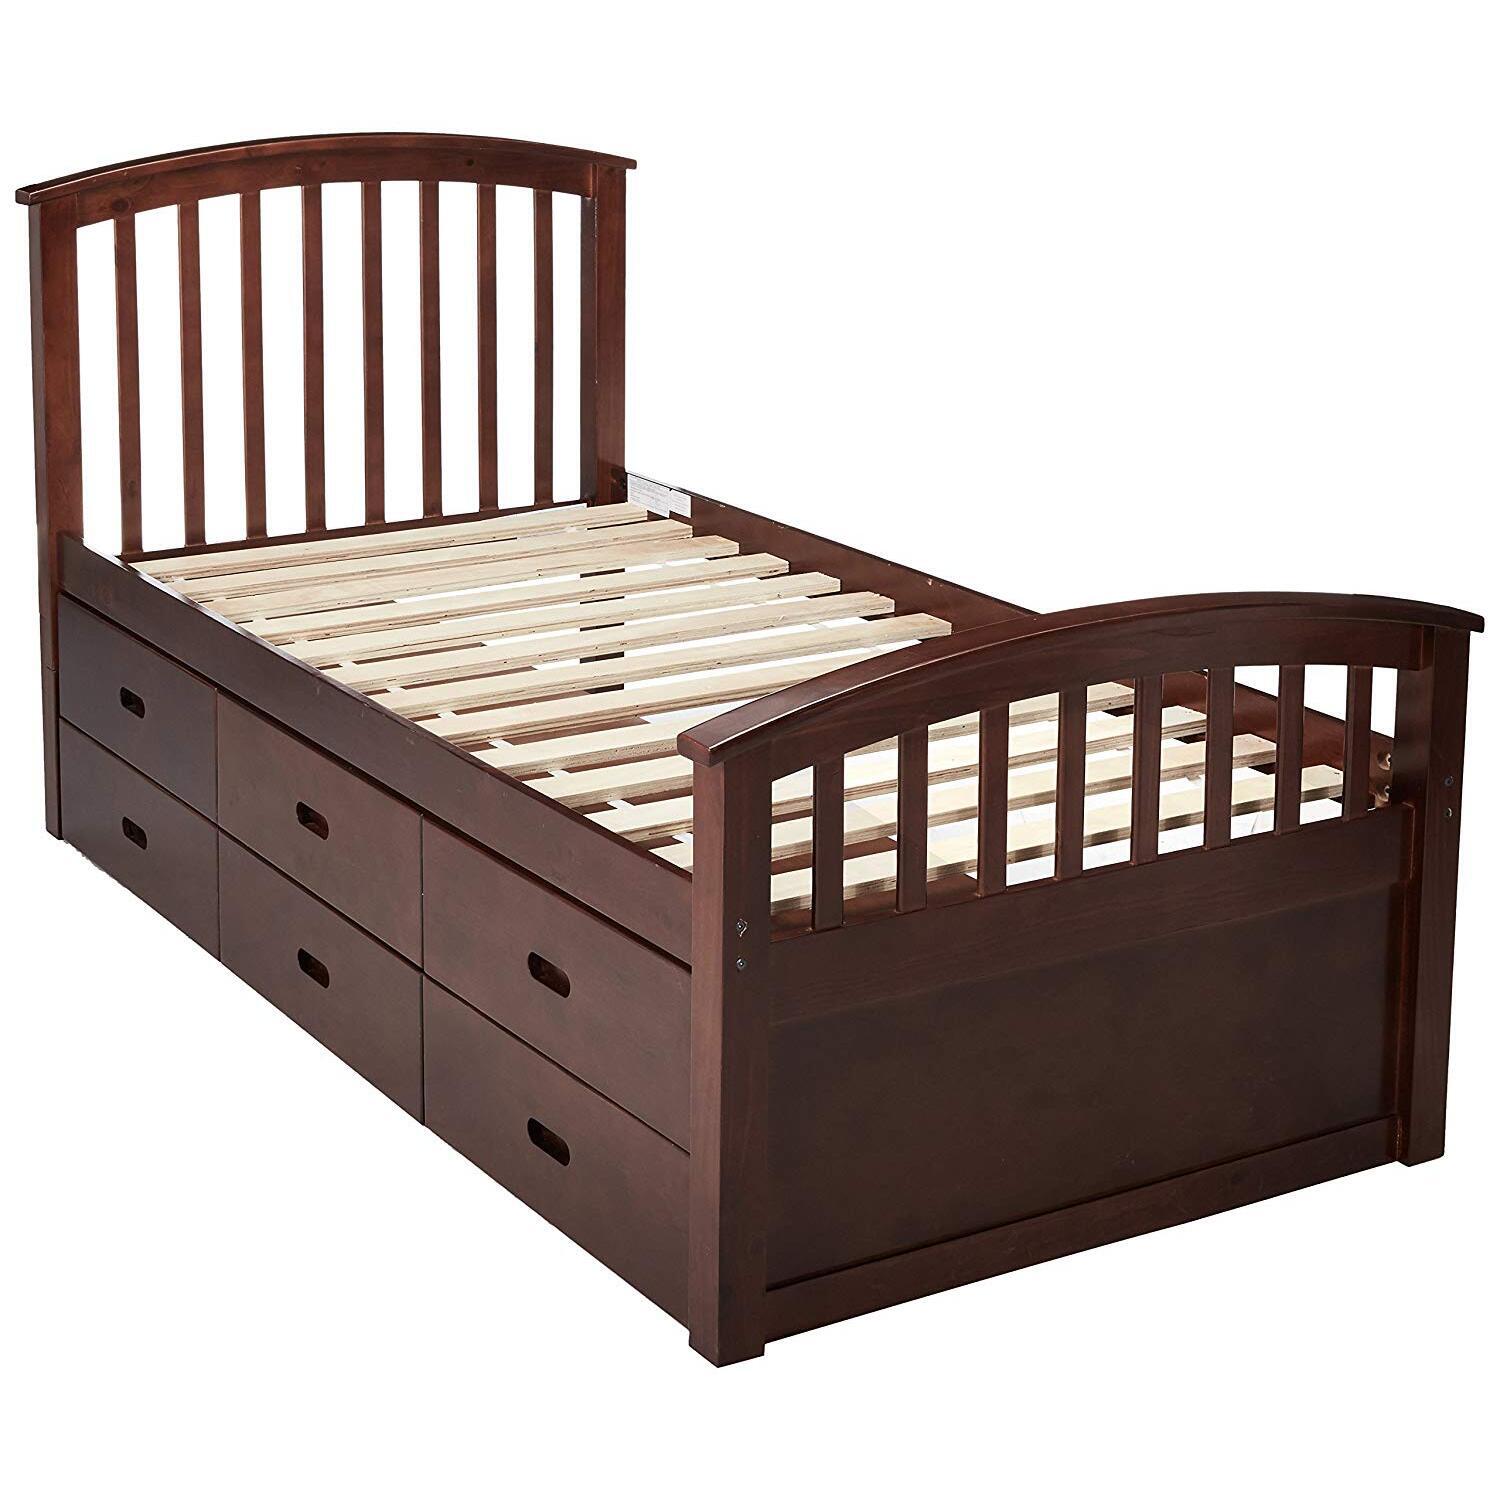 Donco Kids 6 Drawer Storage Bed, Dark Cappuccino, Twin - image 1 of 5